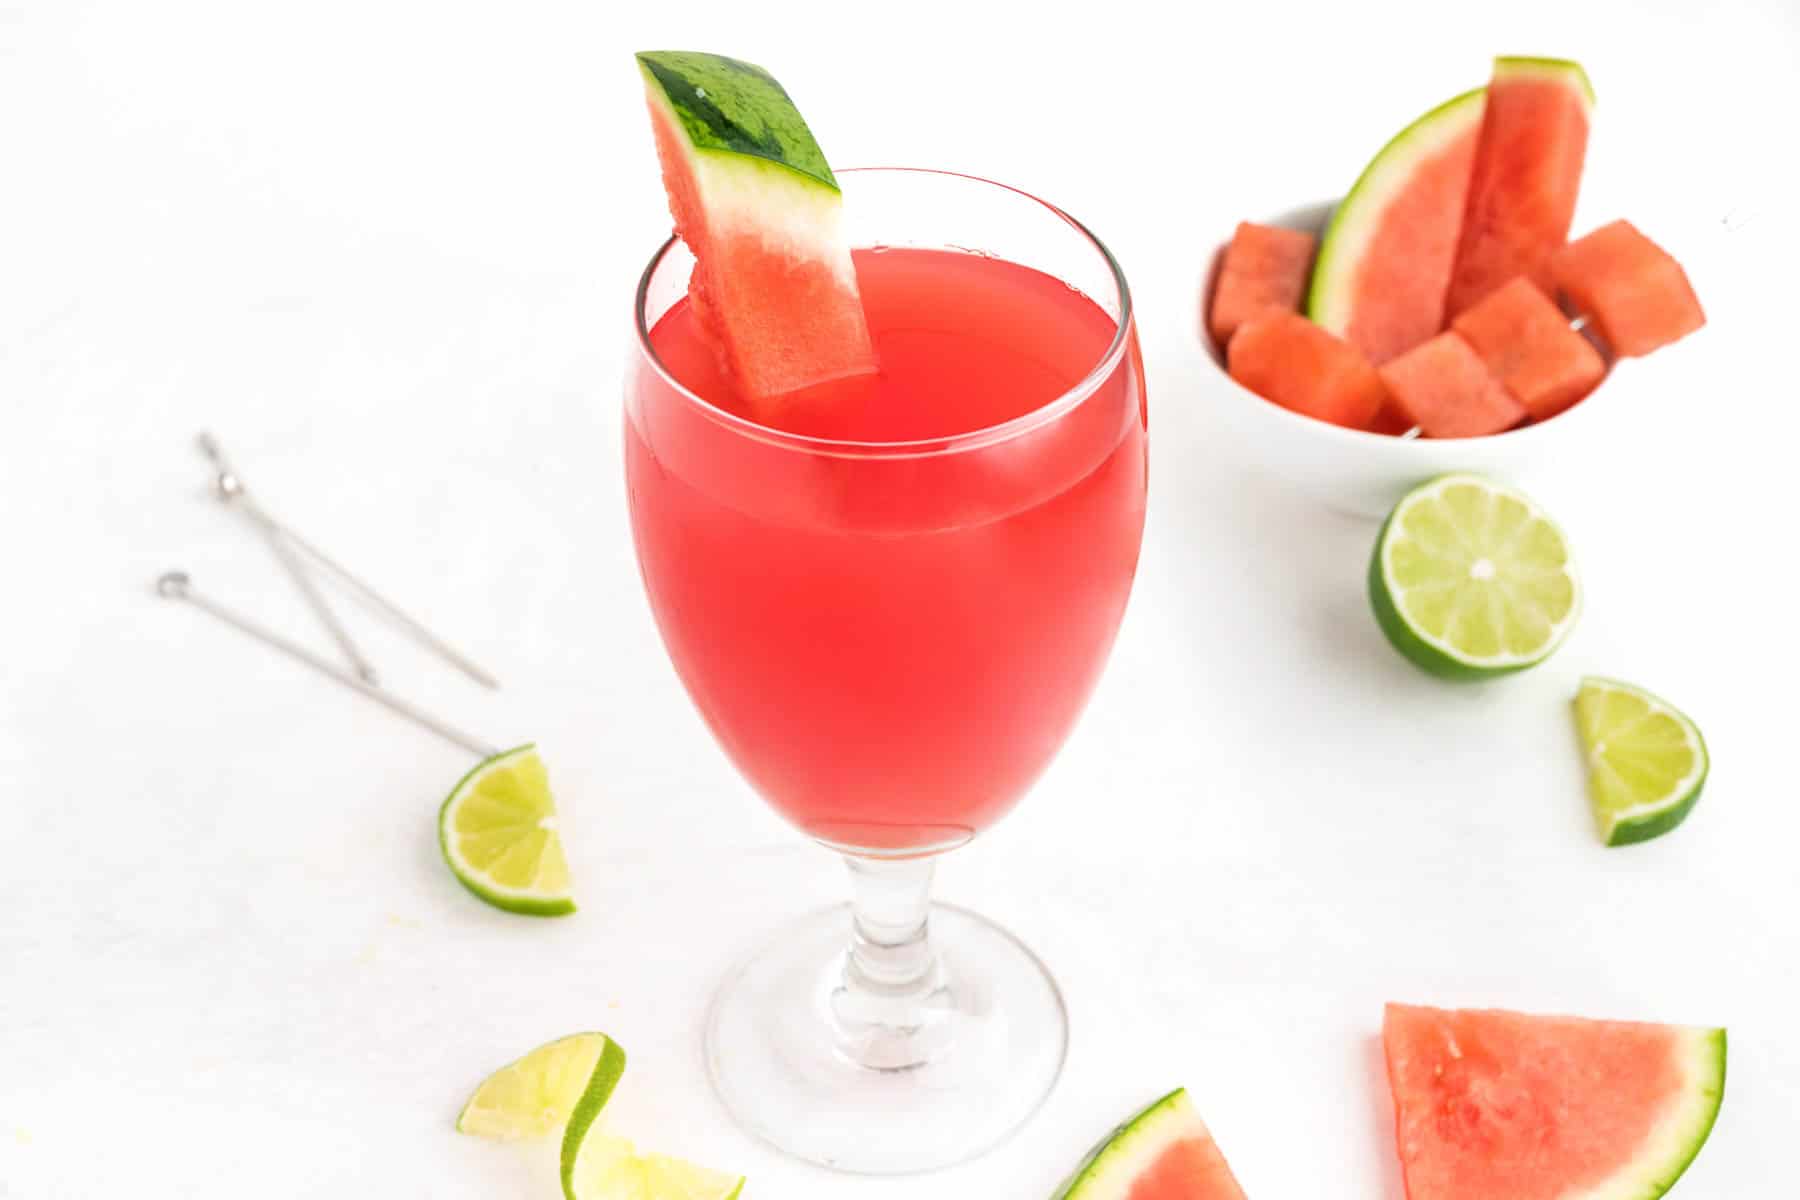 Watermelon and lime pieces surround a glass of a refreshing watermelon drink.